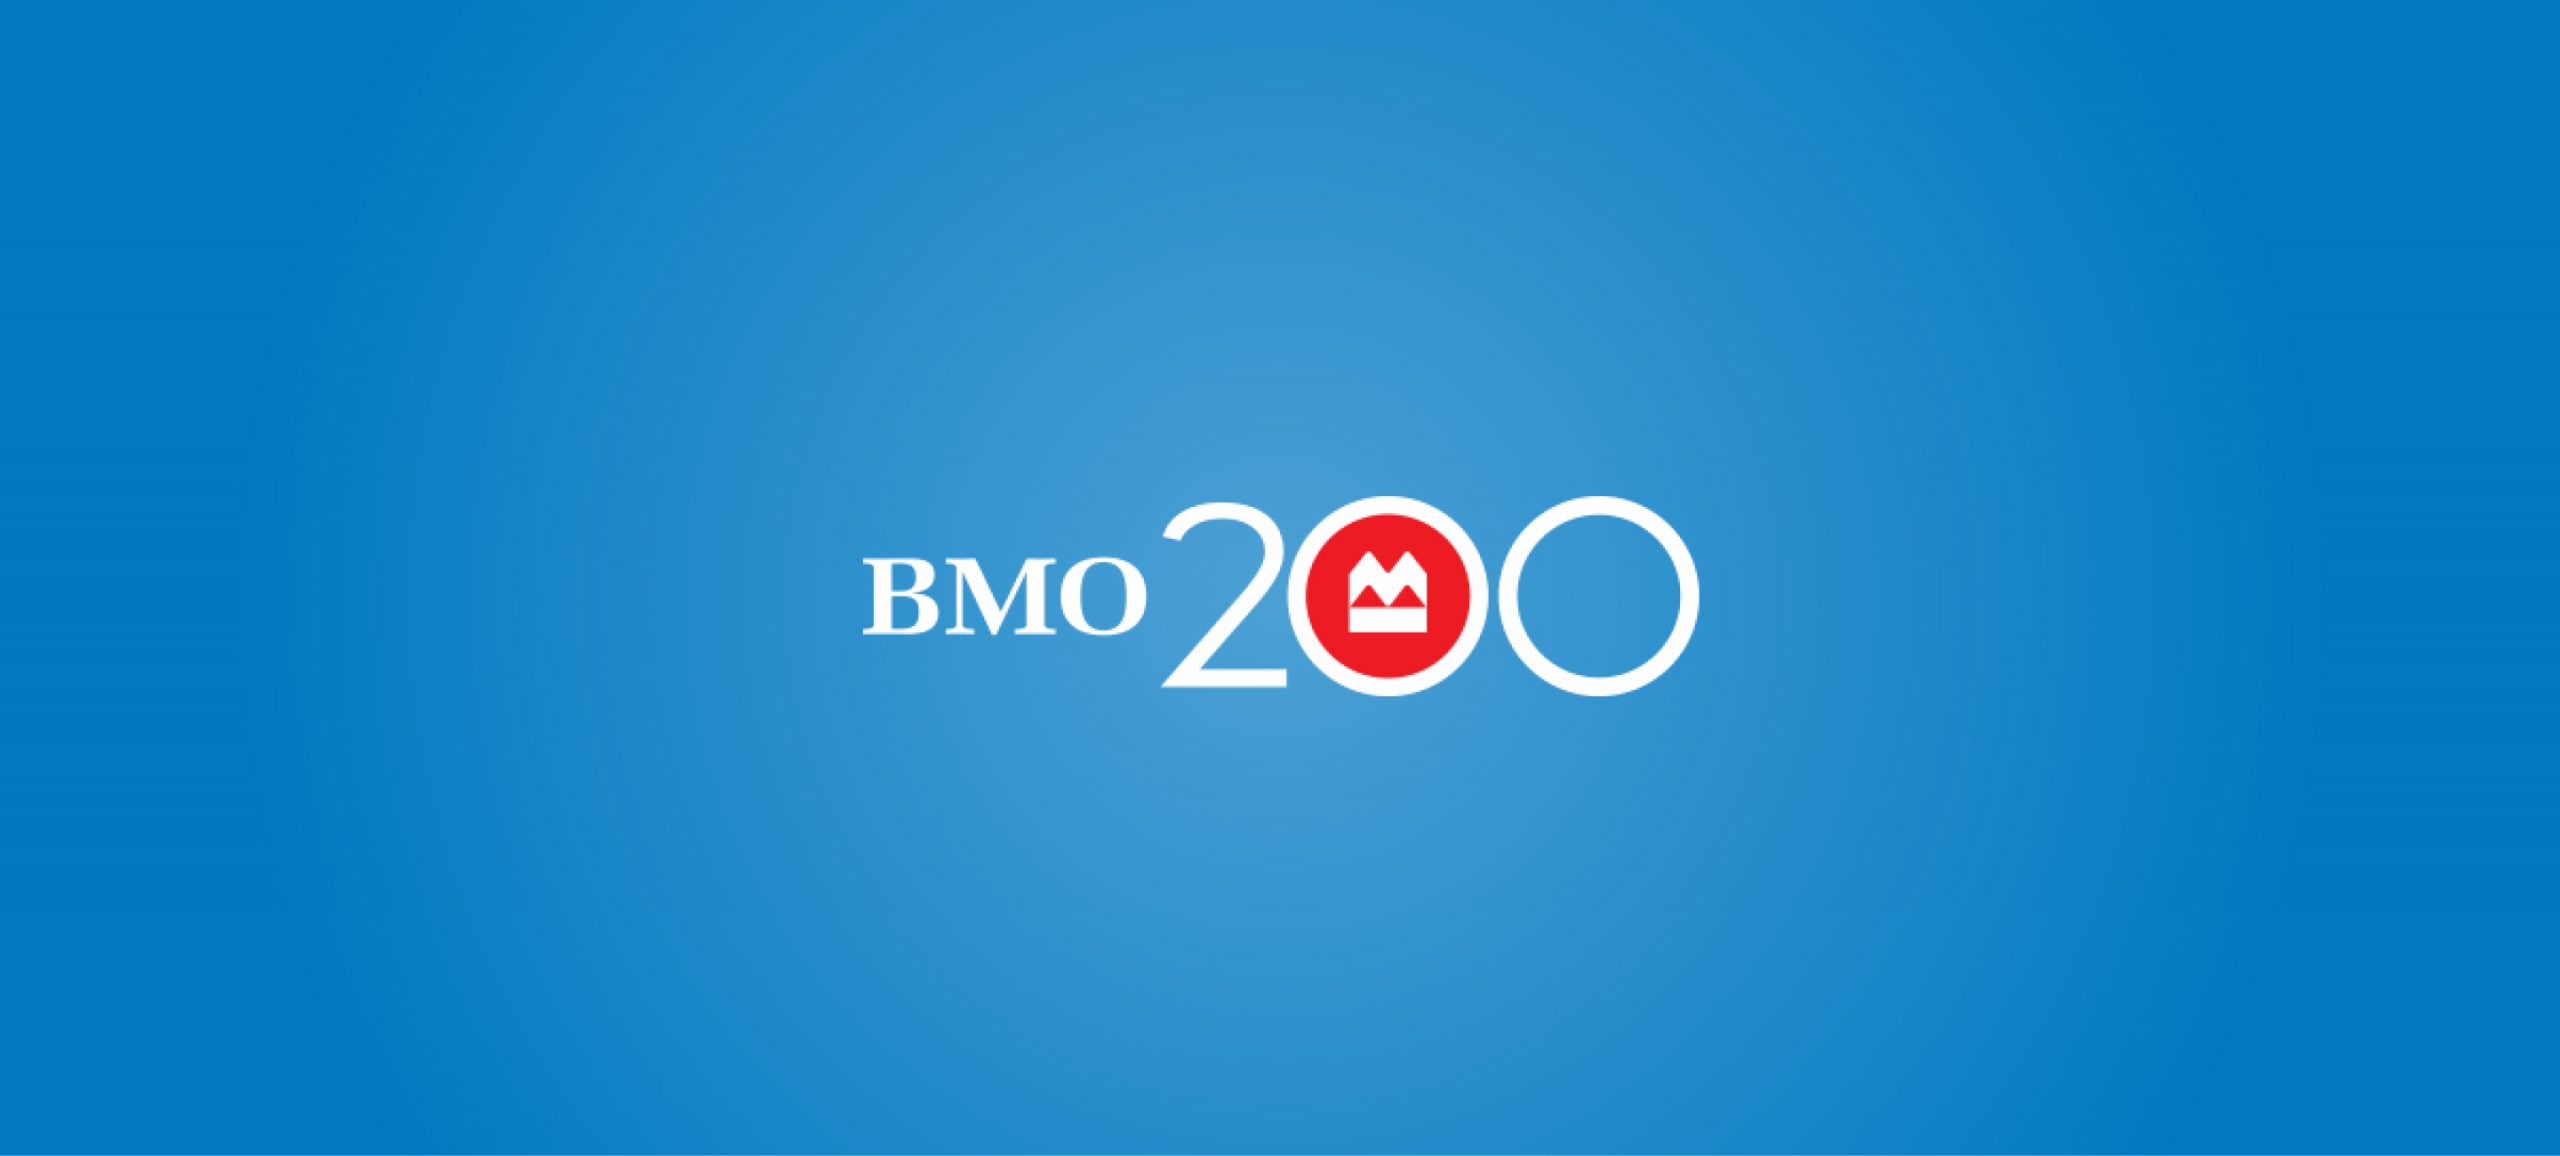 The BMO 200 logo is shown on a blue background